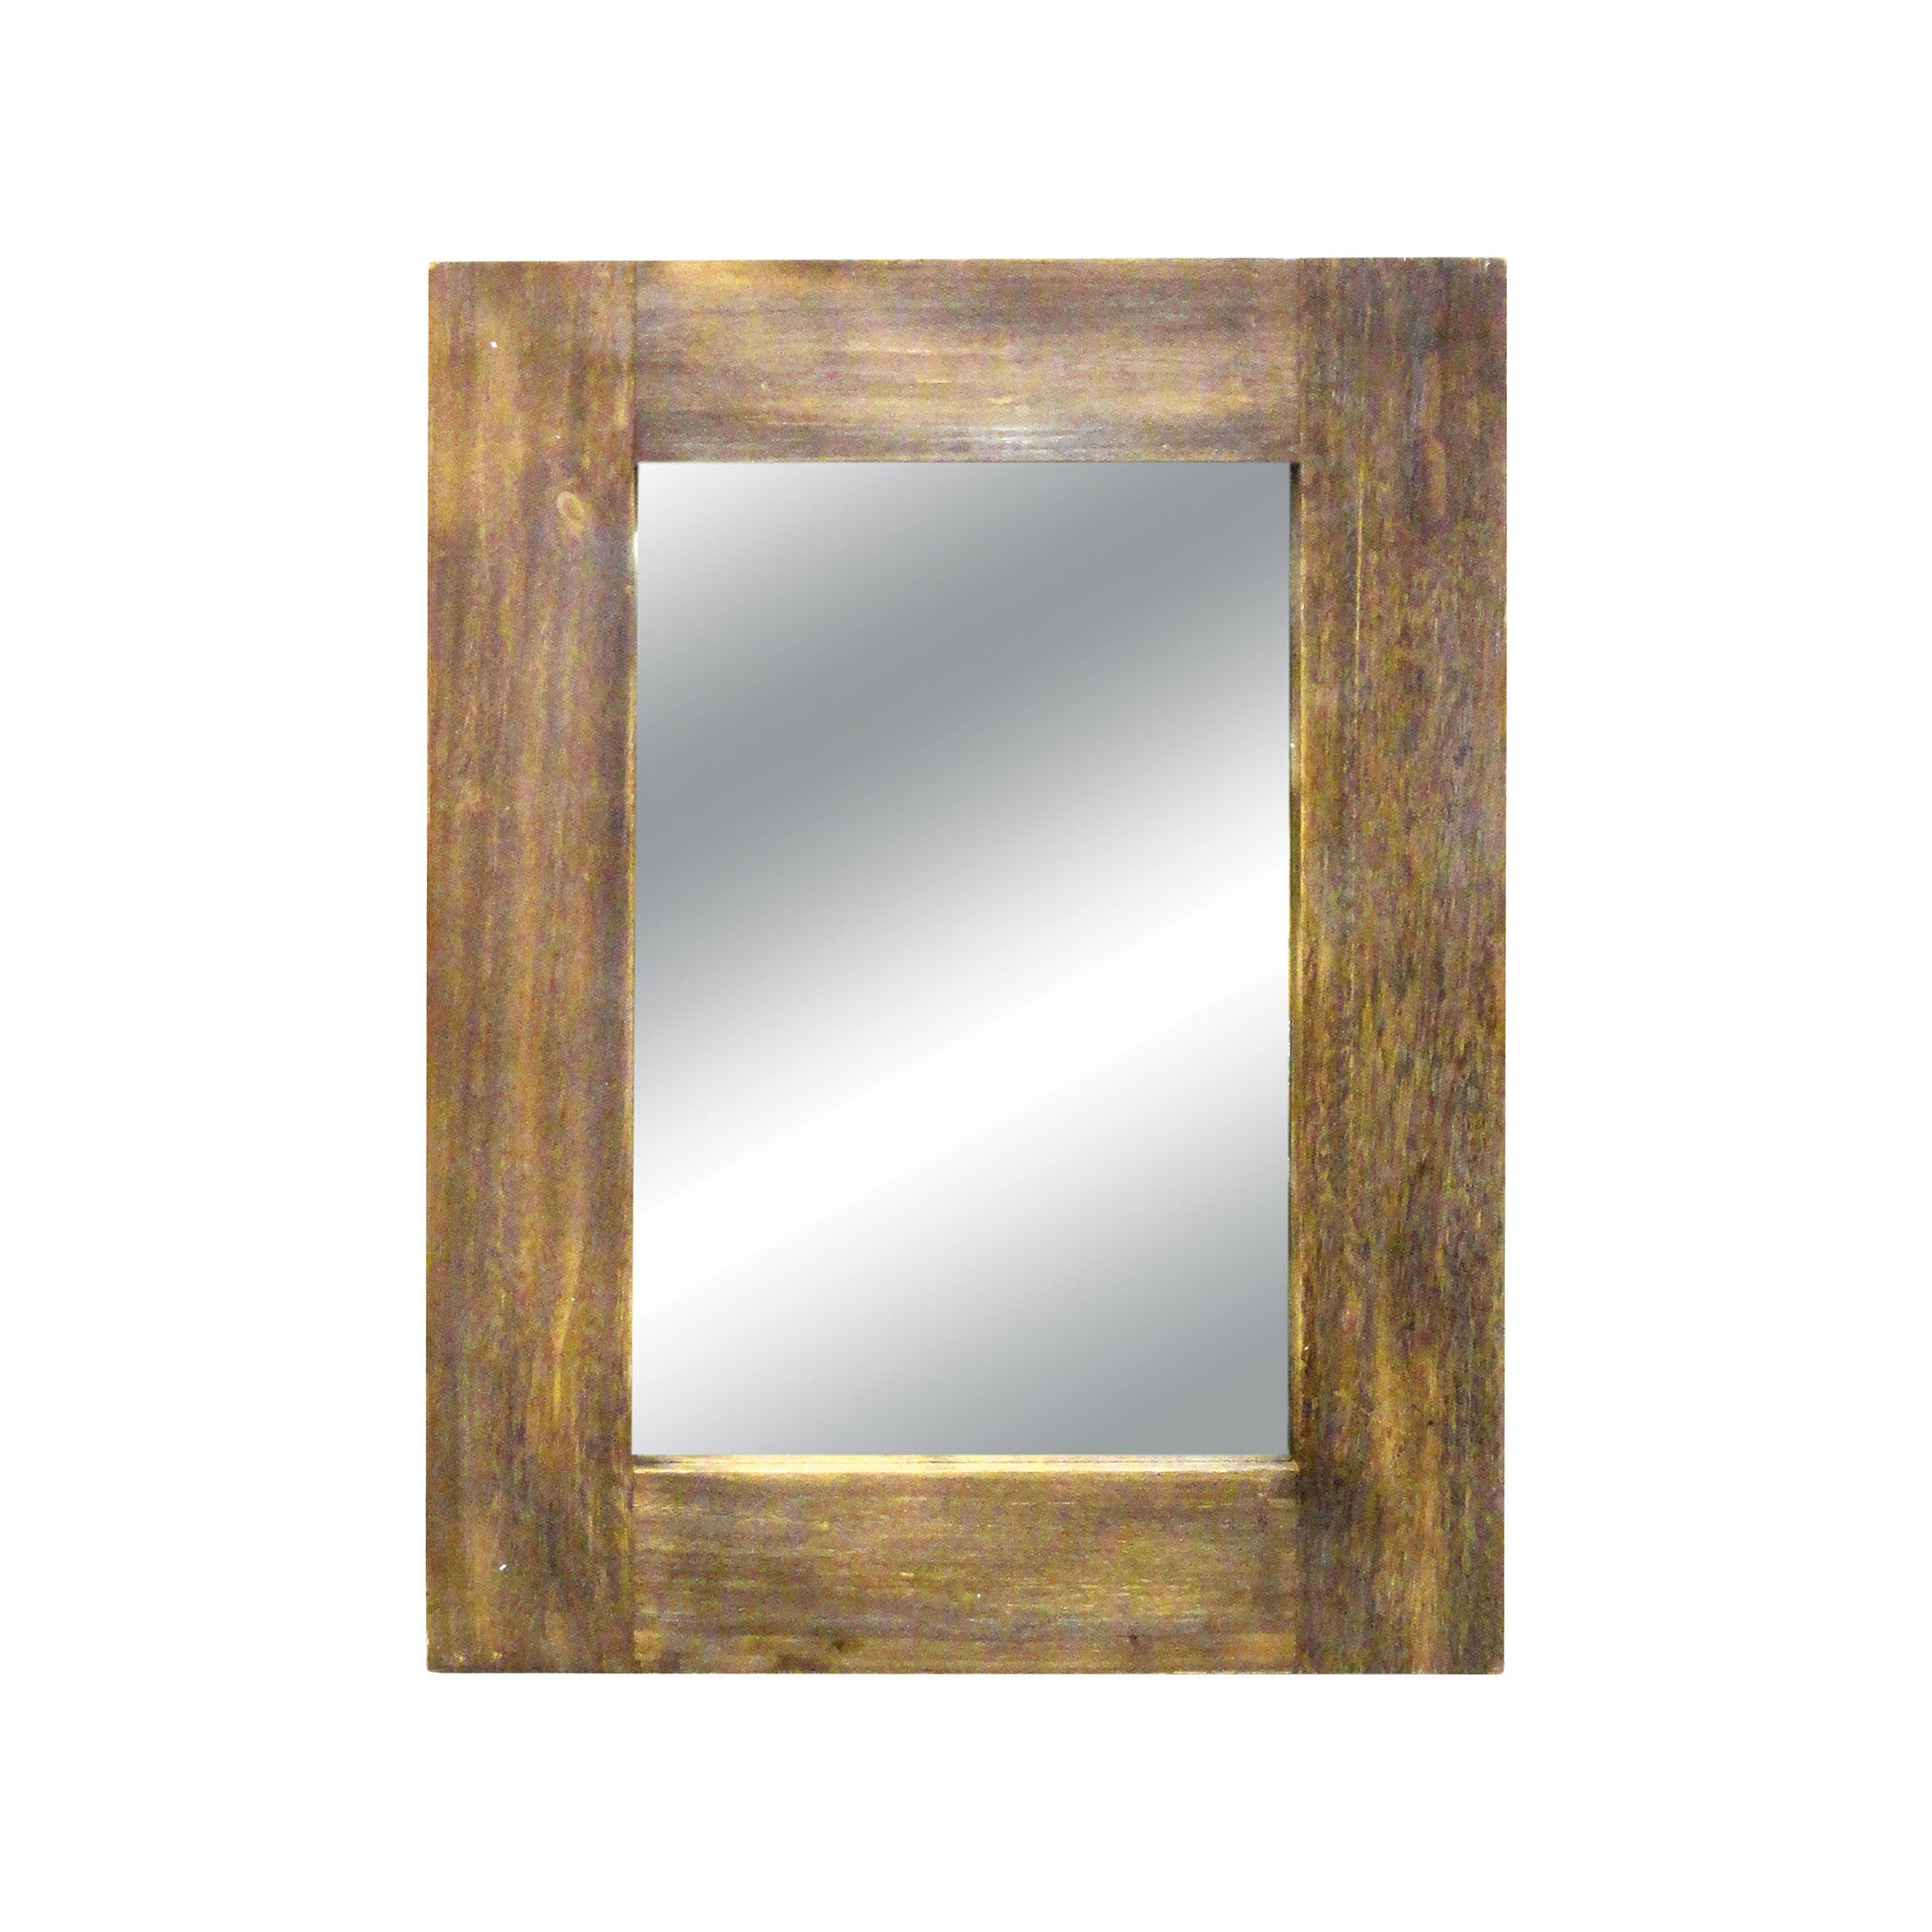 Pomeroy Pom-400735 Canal Collection Ashwood Finish Mirror